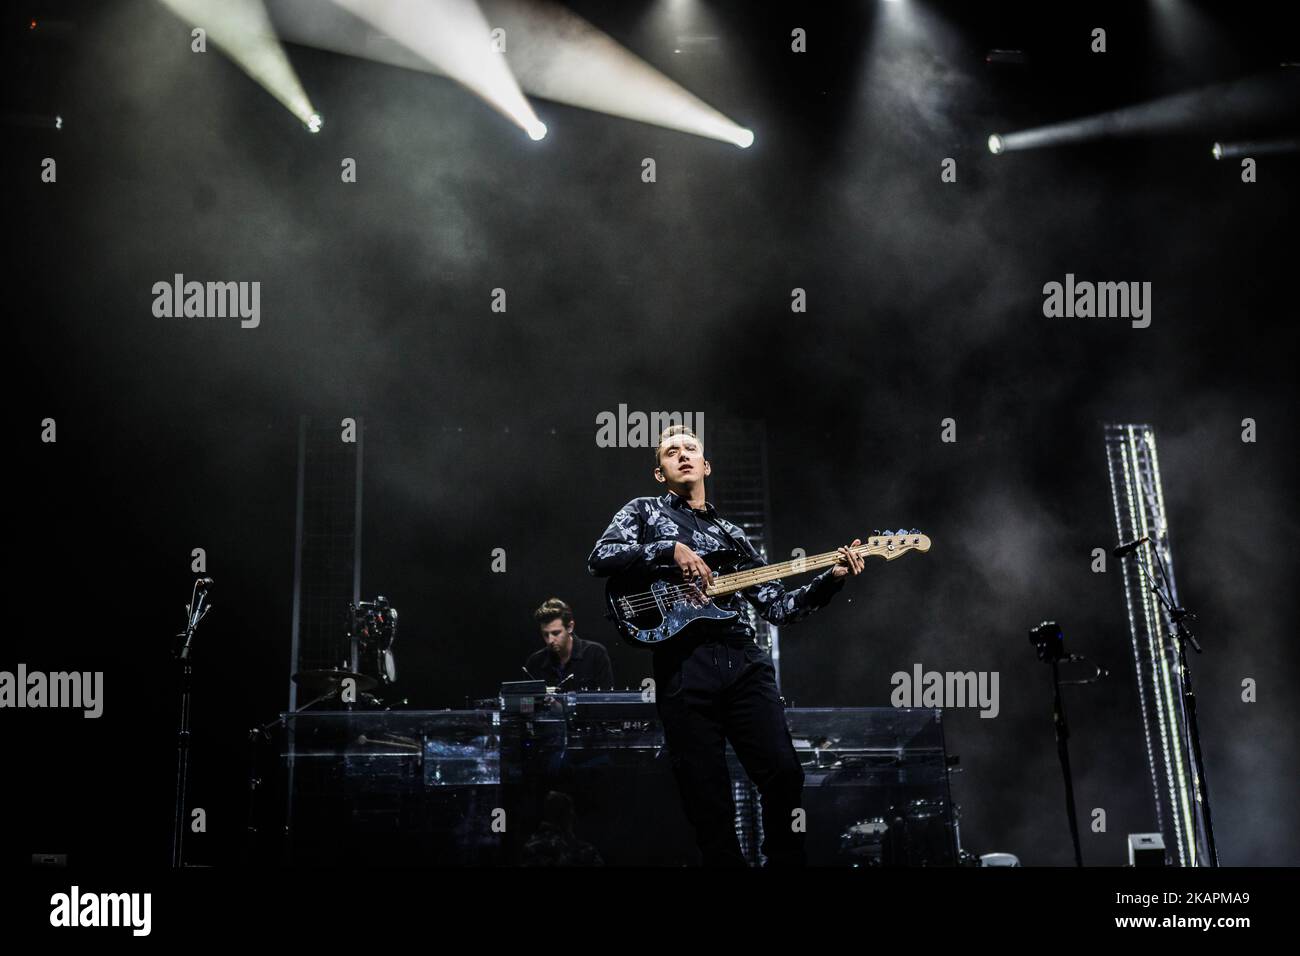 Oliver SIM della band indie inglese The XX Performing live at Lowlands Festival 2017 Biddinghuizen, Netherlands (Photo by Roberto Finizio/NurPhoto) Foto Stock